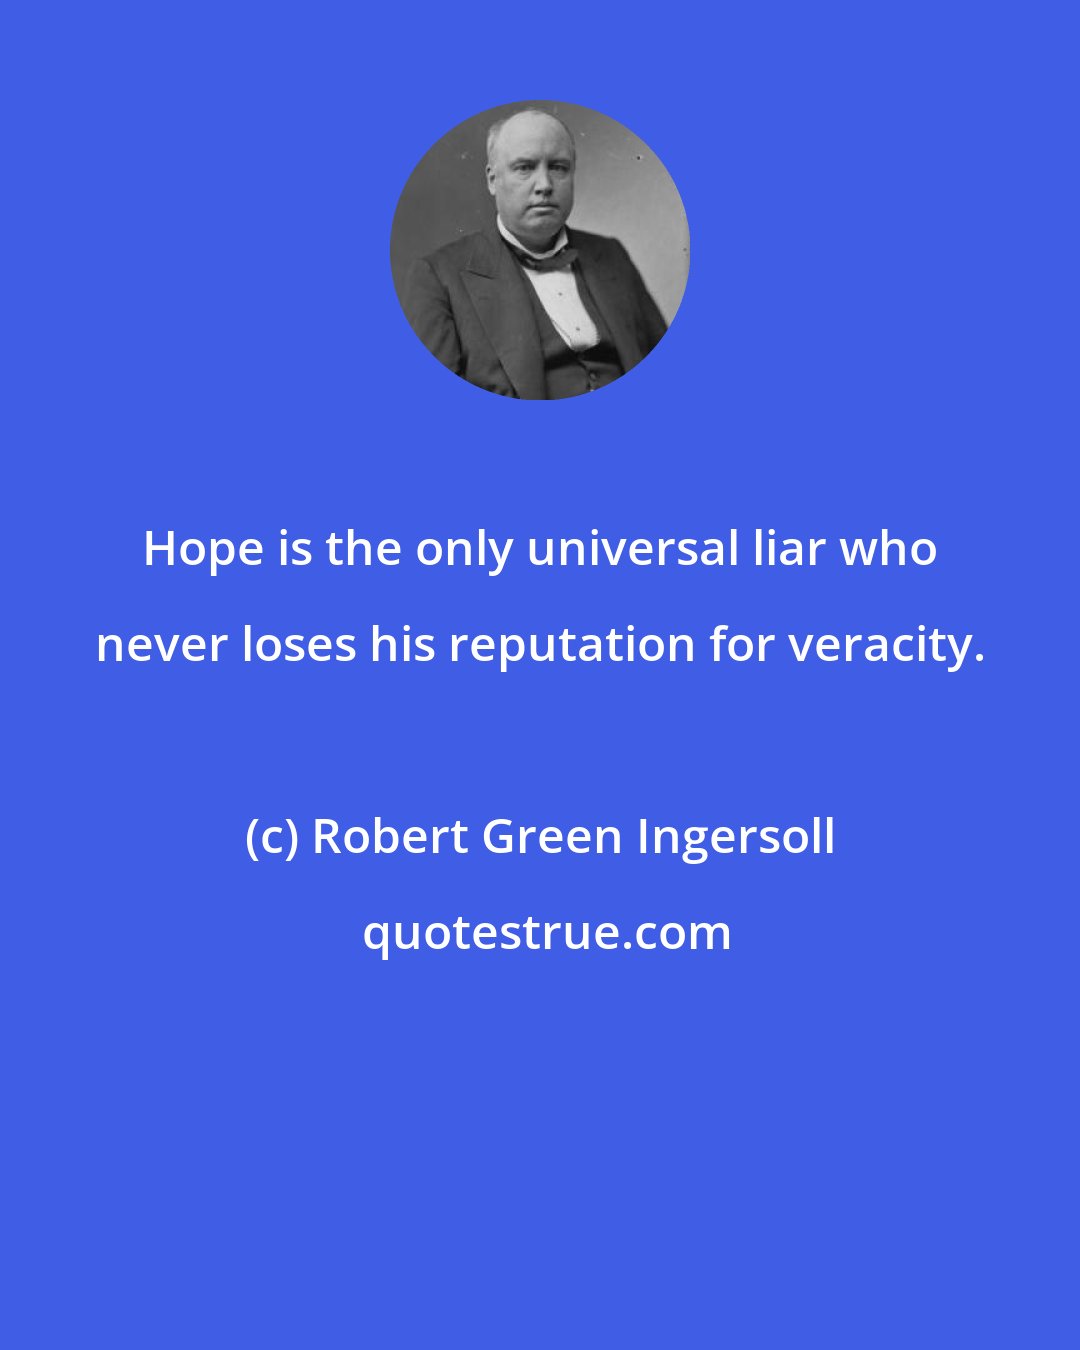 Robert Green Ingersoll: Hope is the only universal liar who never loses his reputation for veracity.